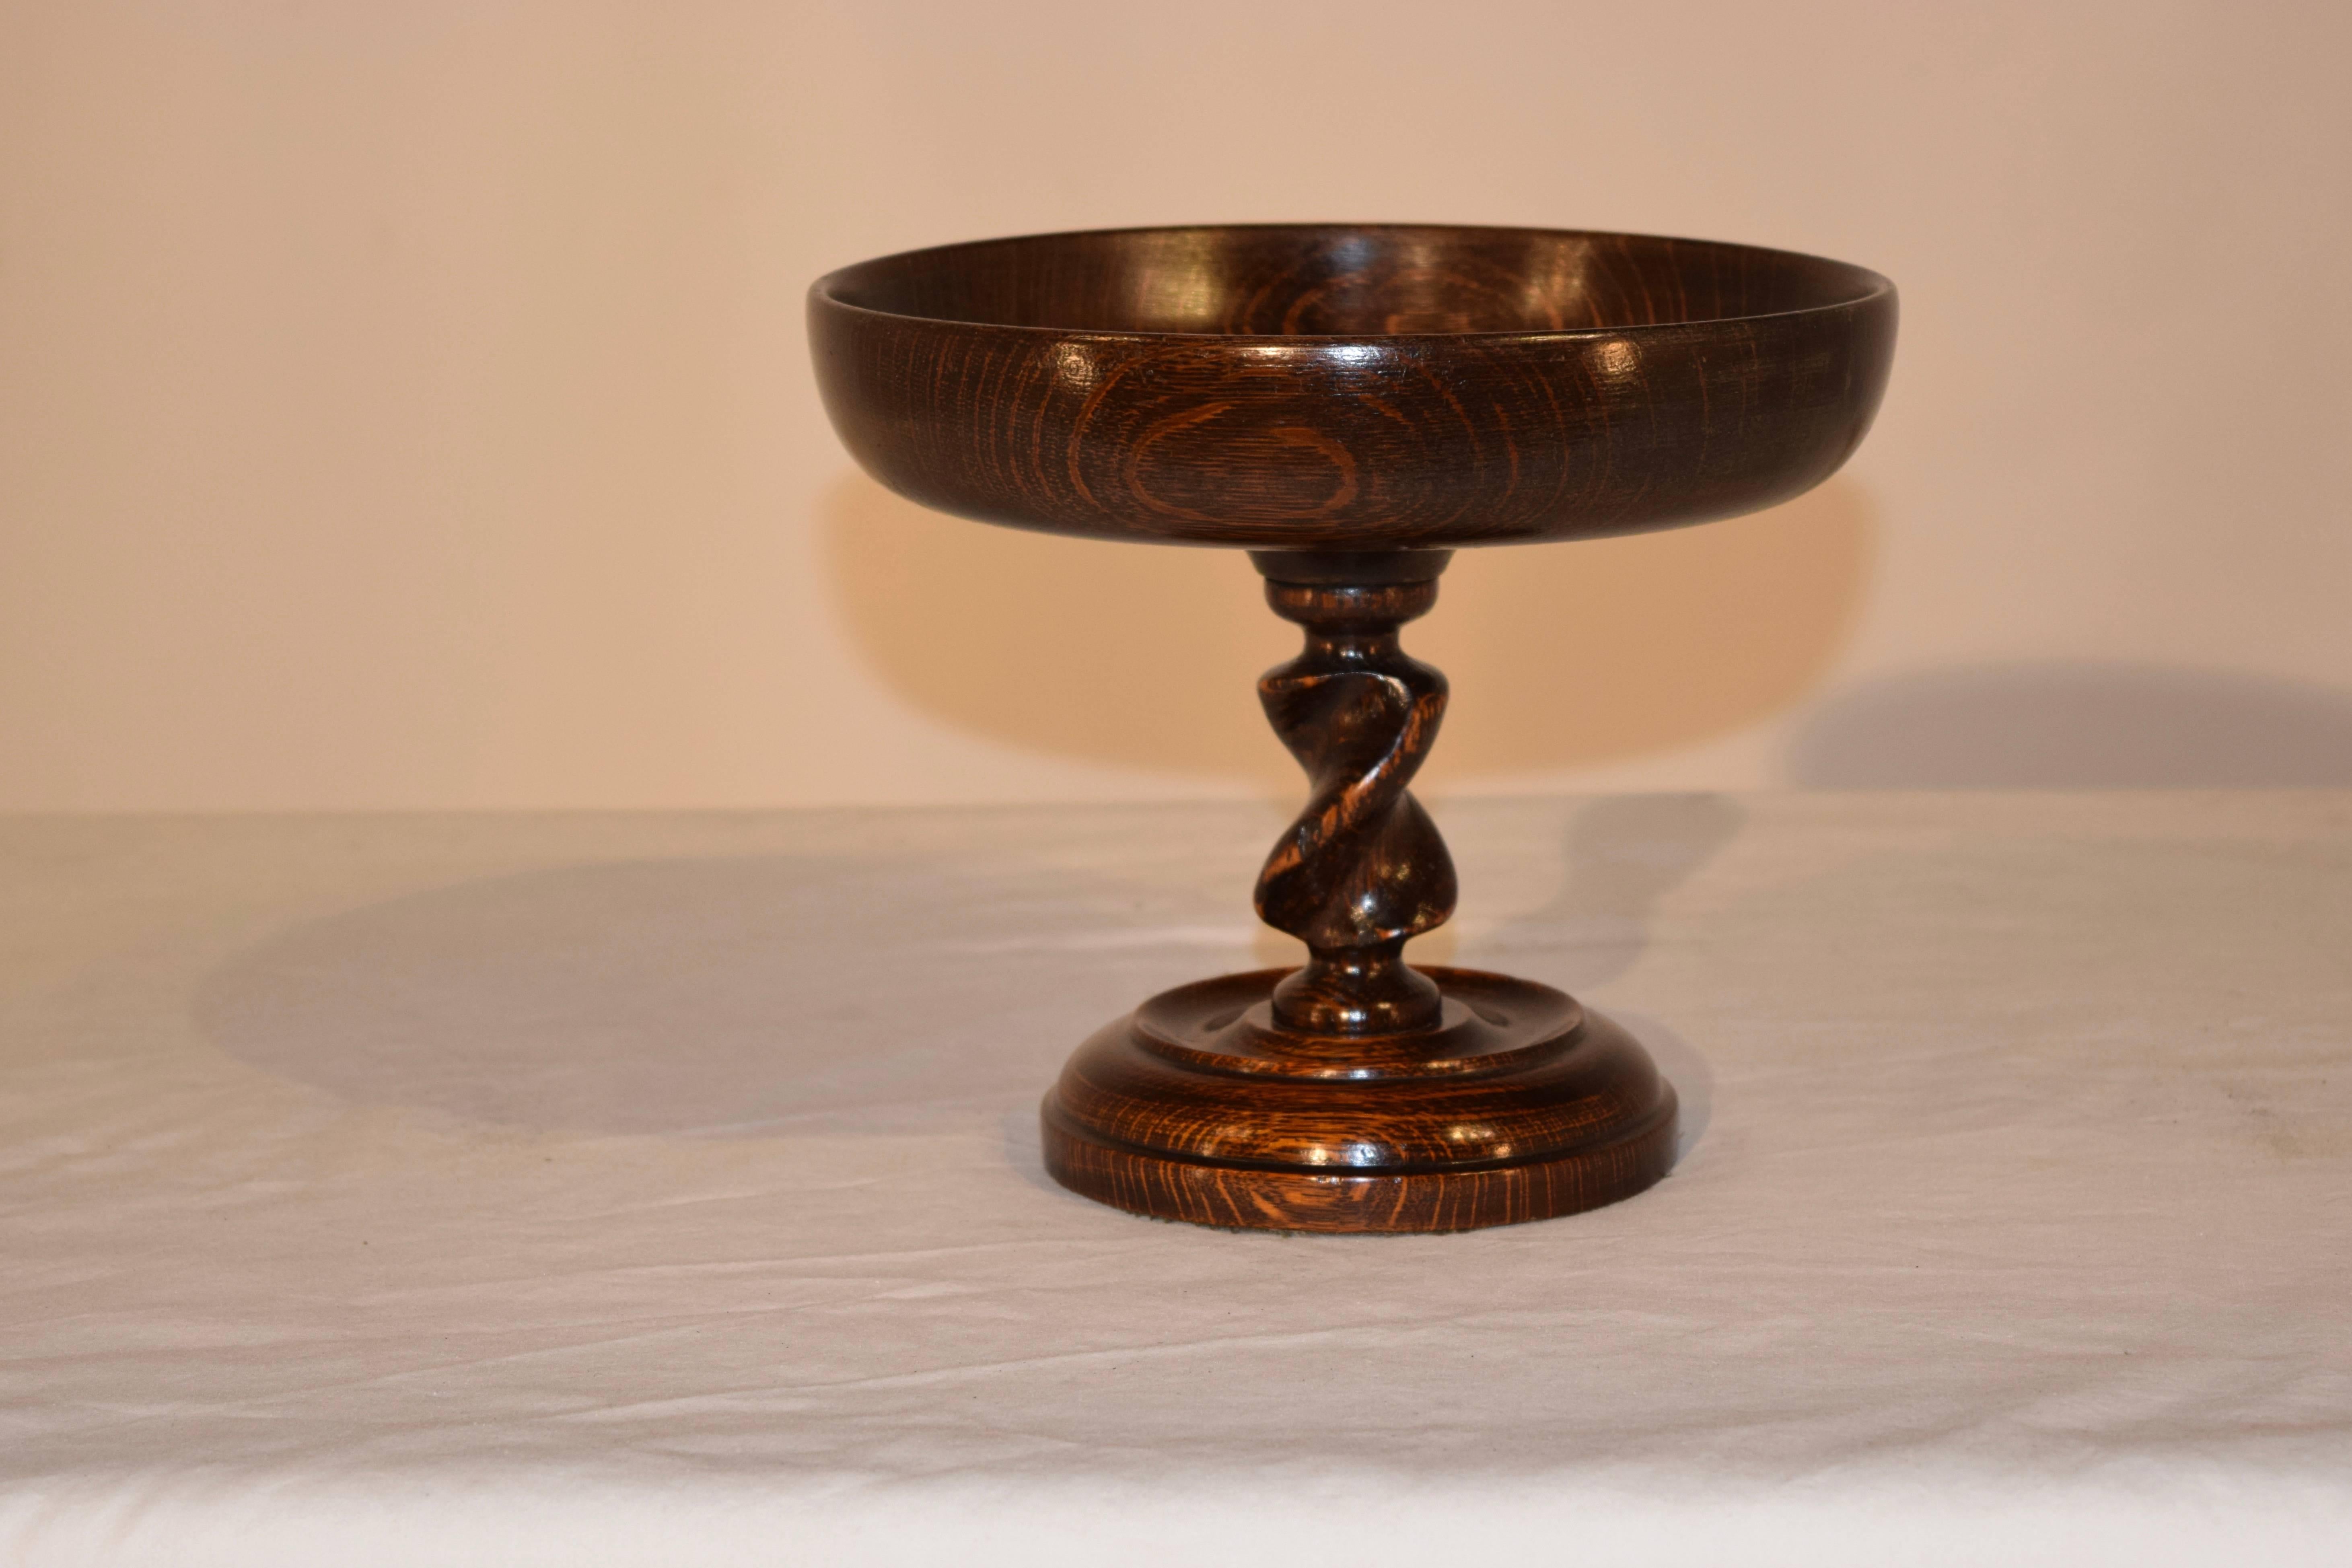 Late 19th century English oak hand-turned compote with a dish shaped bowl and a hand-turned barley twist stem, supported on a hand-turned base.